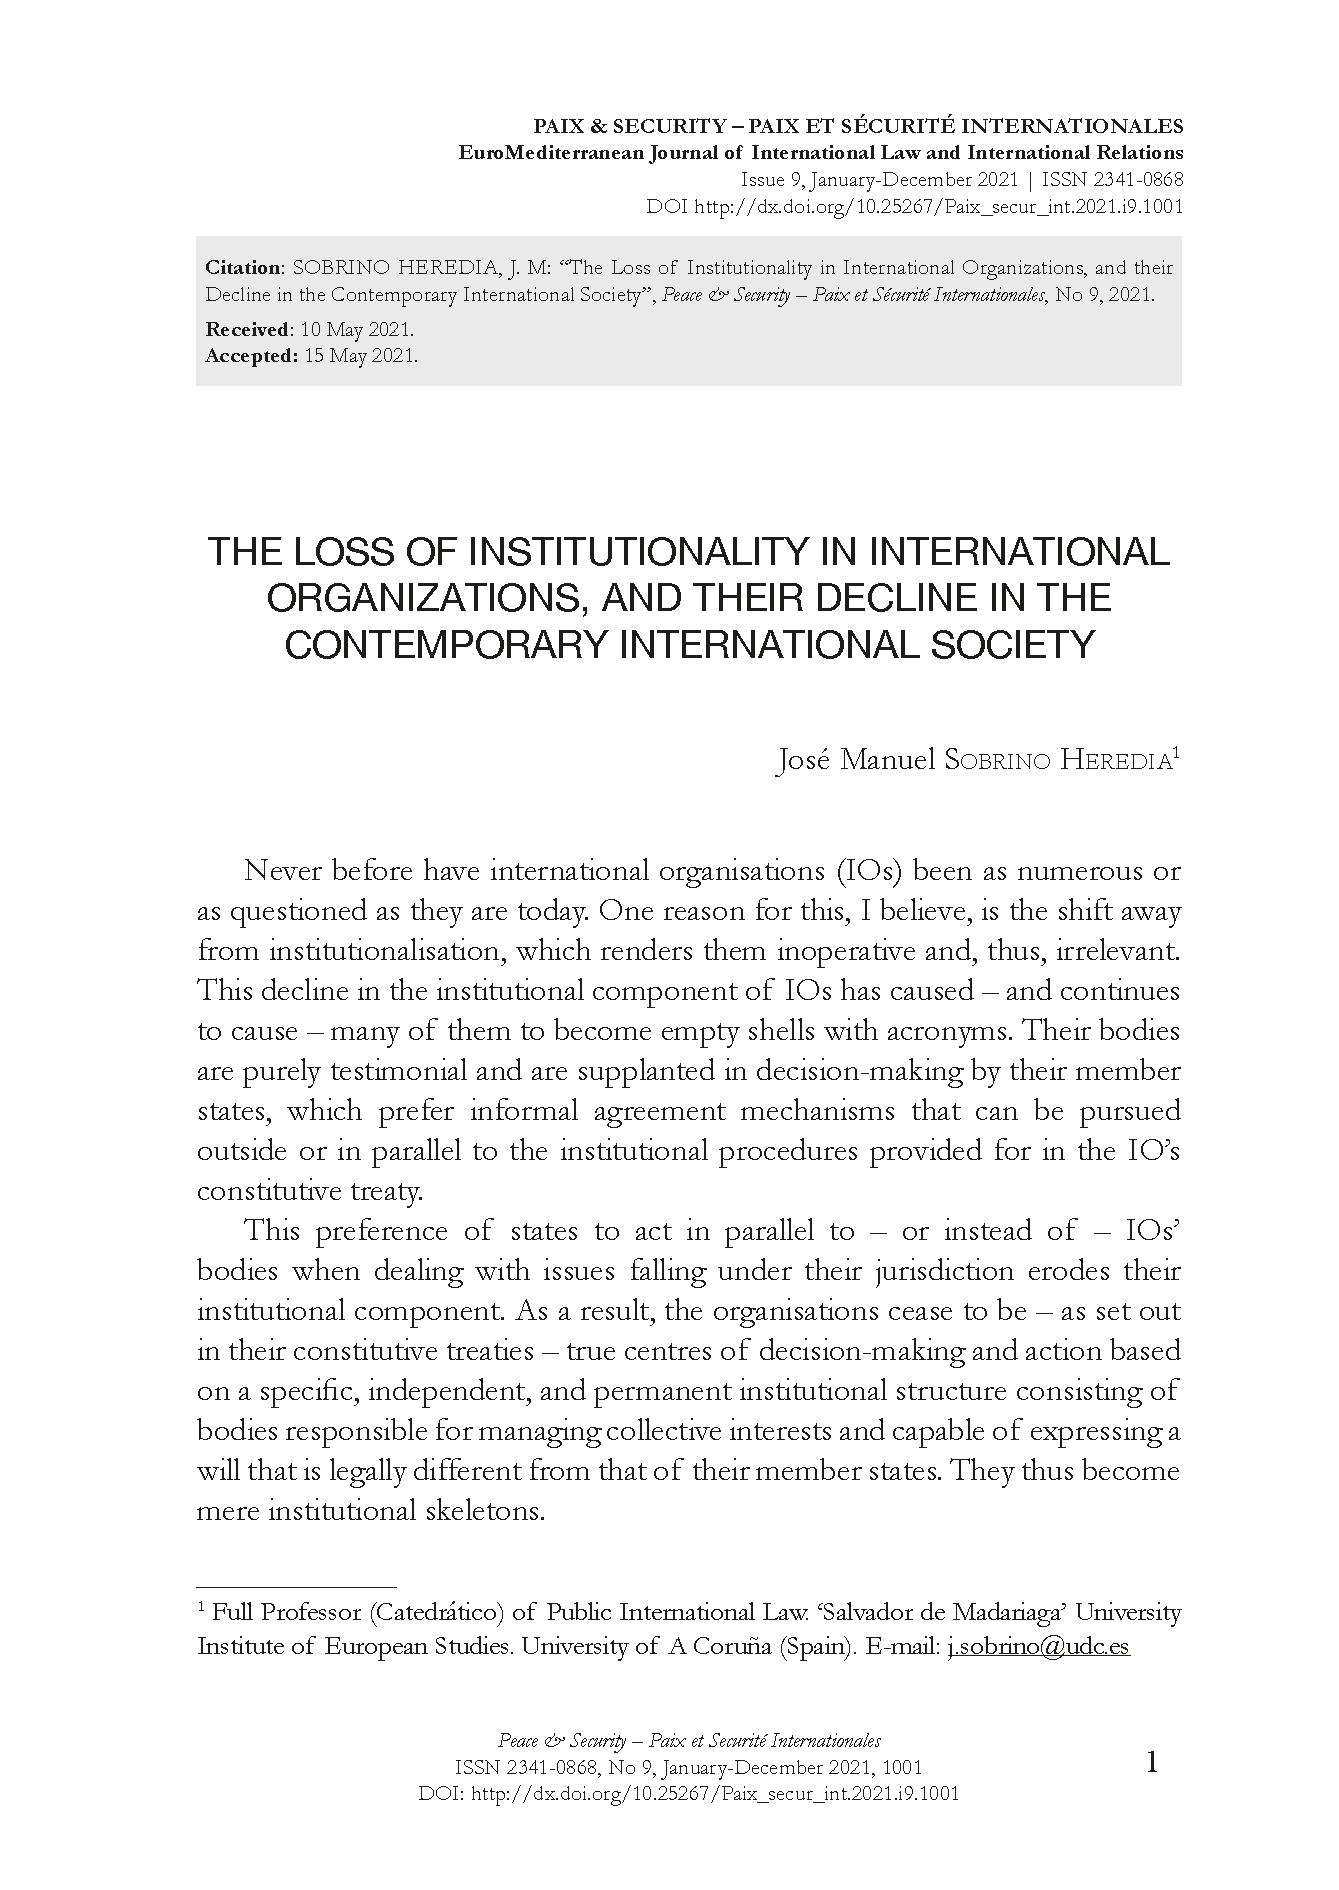 The Loss of Institutionality in International Organizations, and their Decline in the Contemporary International Society